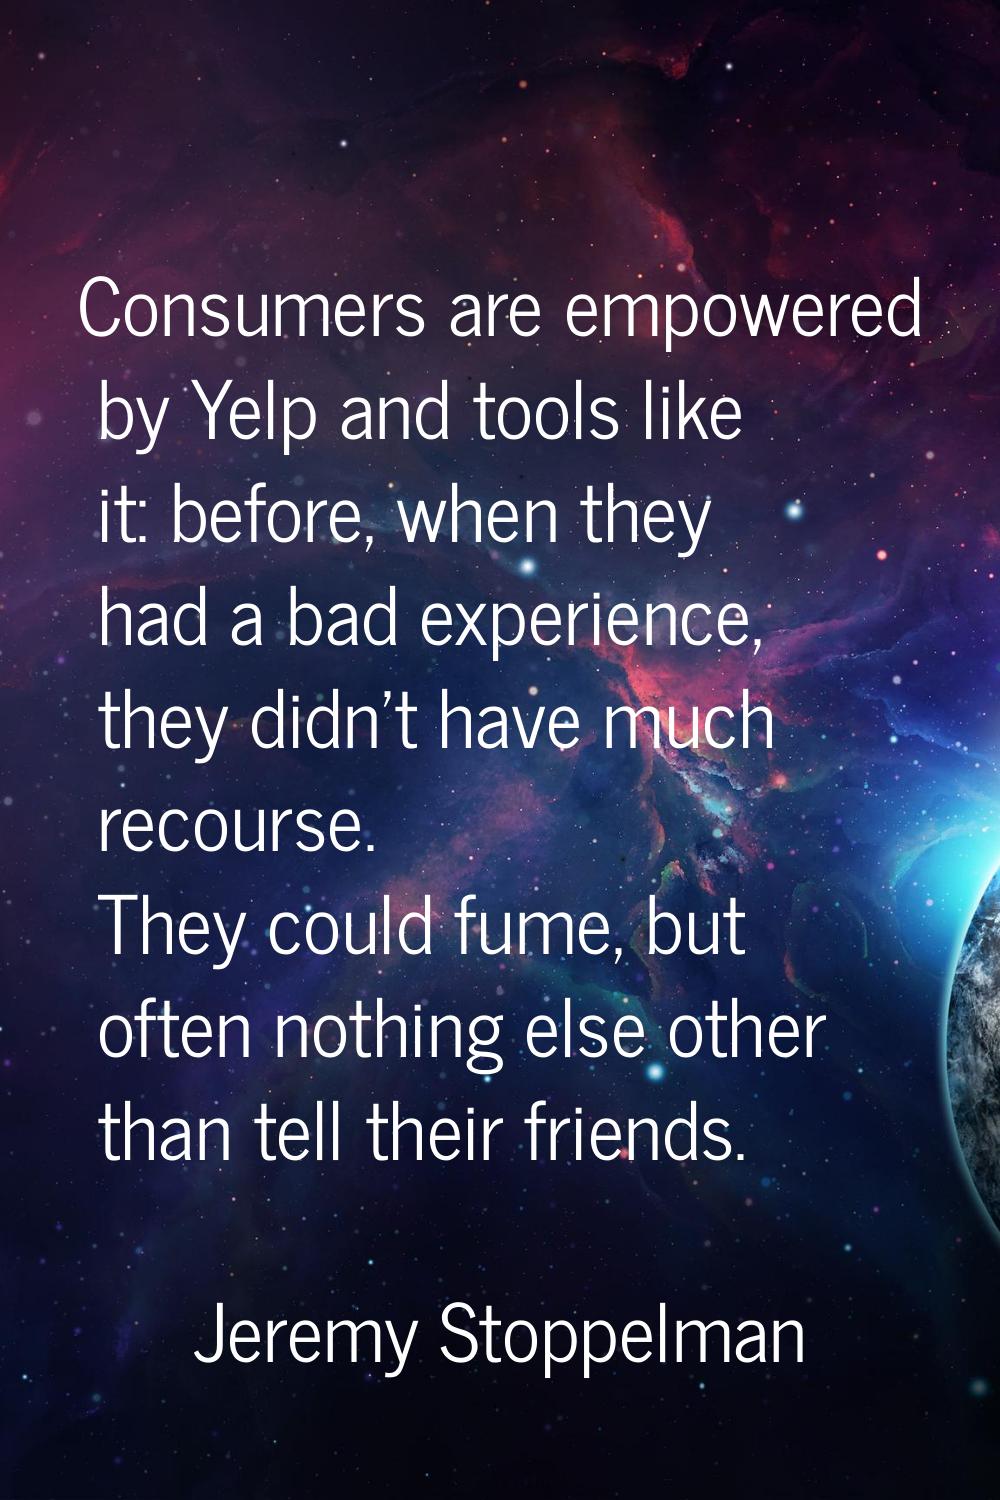 Consumers are empowered by Yelp and tools like it: before, when they had a bad experience, they did